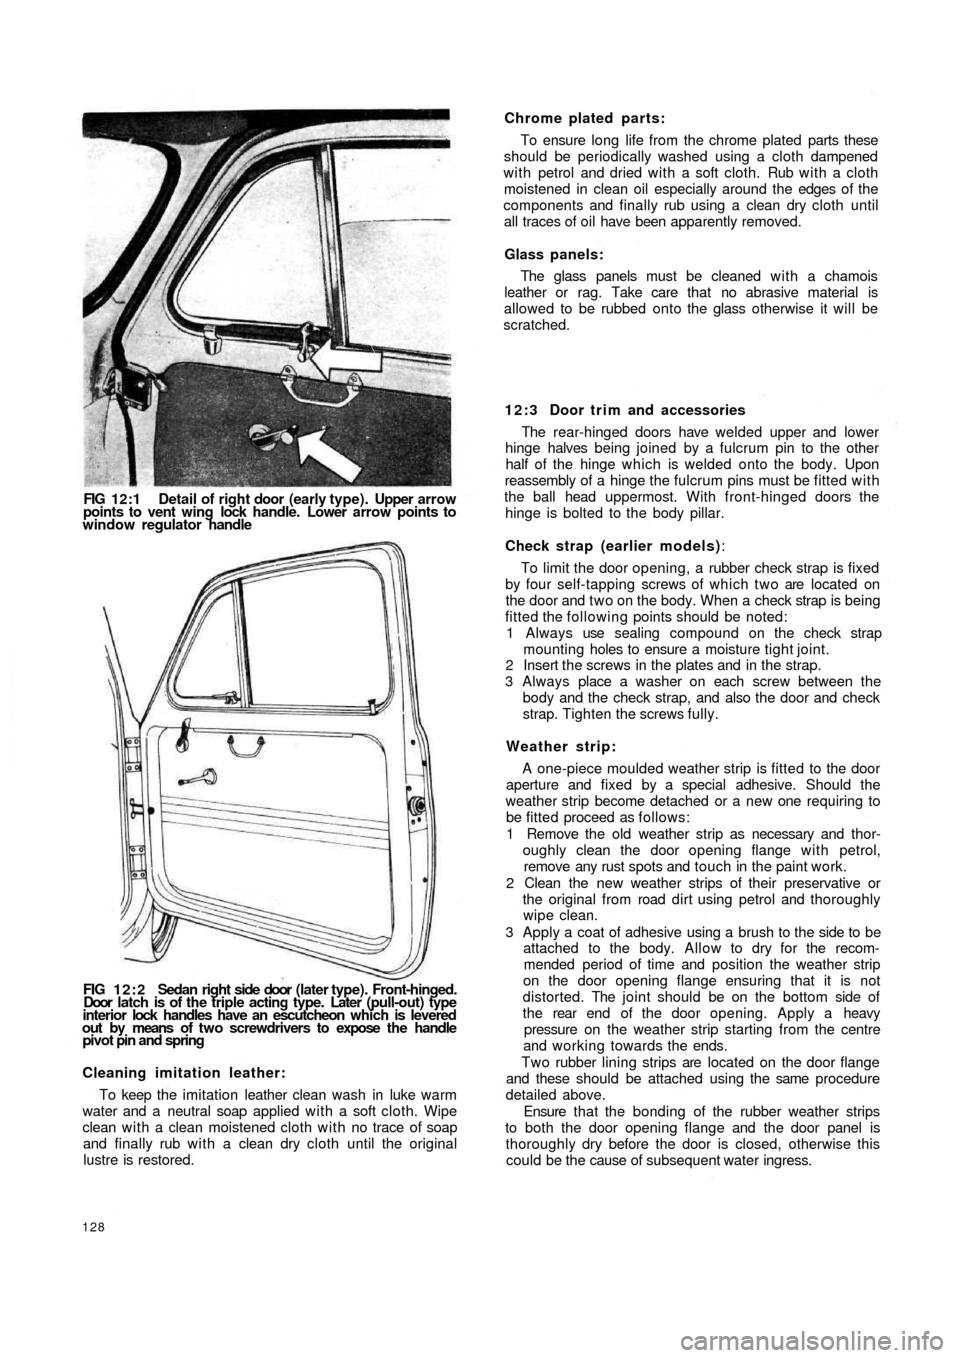 FIAT 500 1971 1.G User Guide FIG 12:1 Detail of right door (early type). Upper arrow
points to  vent wing lock  handle. Lower arrow points to
window regulator handle
FIG  1 2 : 2   Sedan  right  side  door  (later type). Front-hi